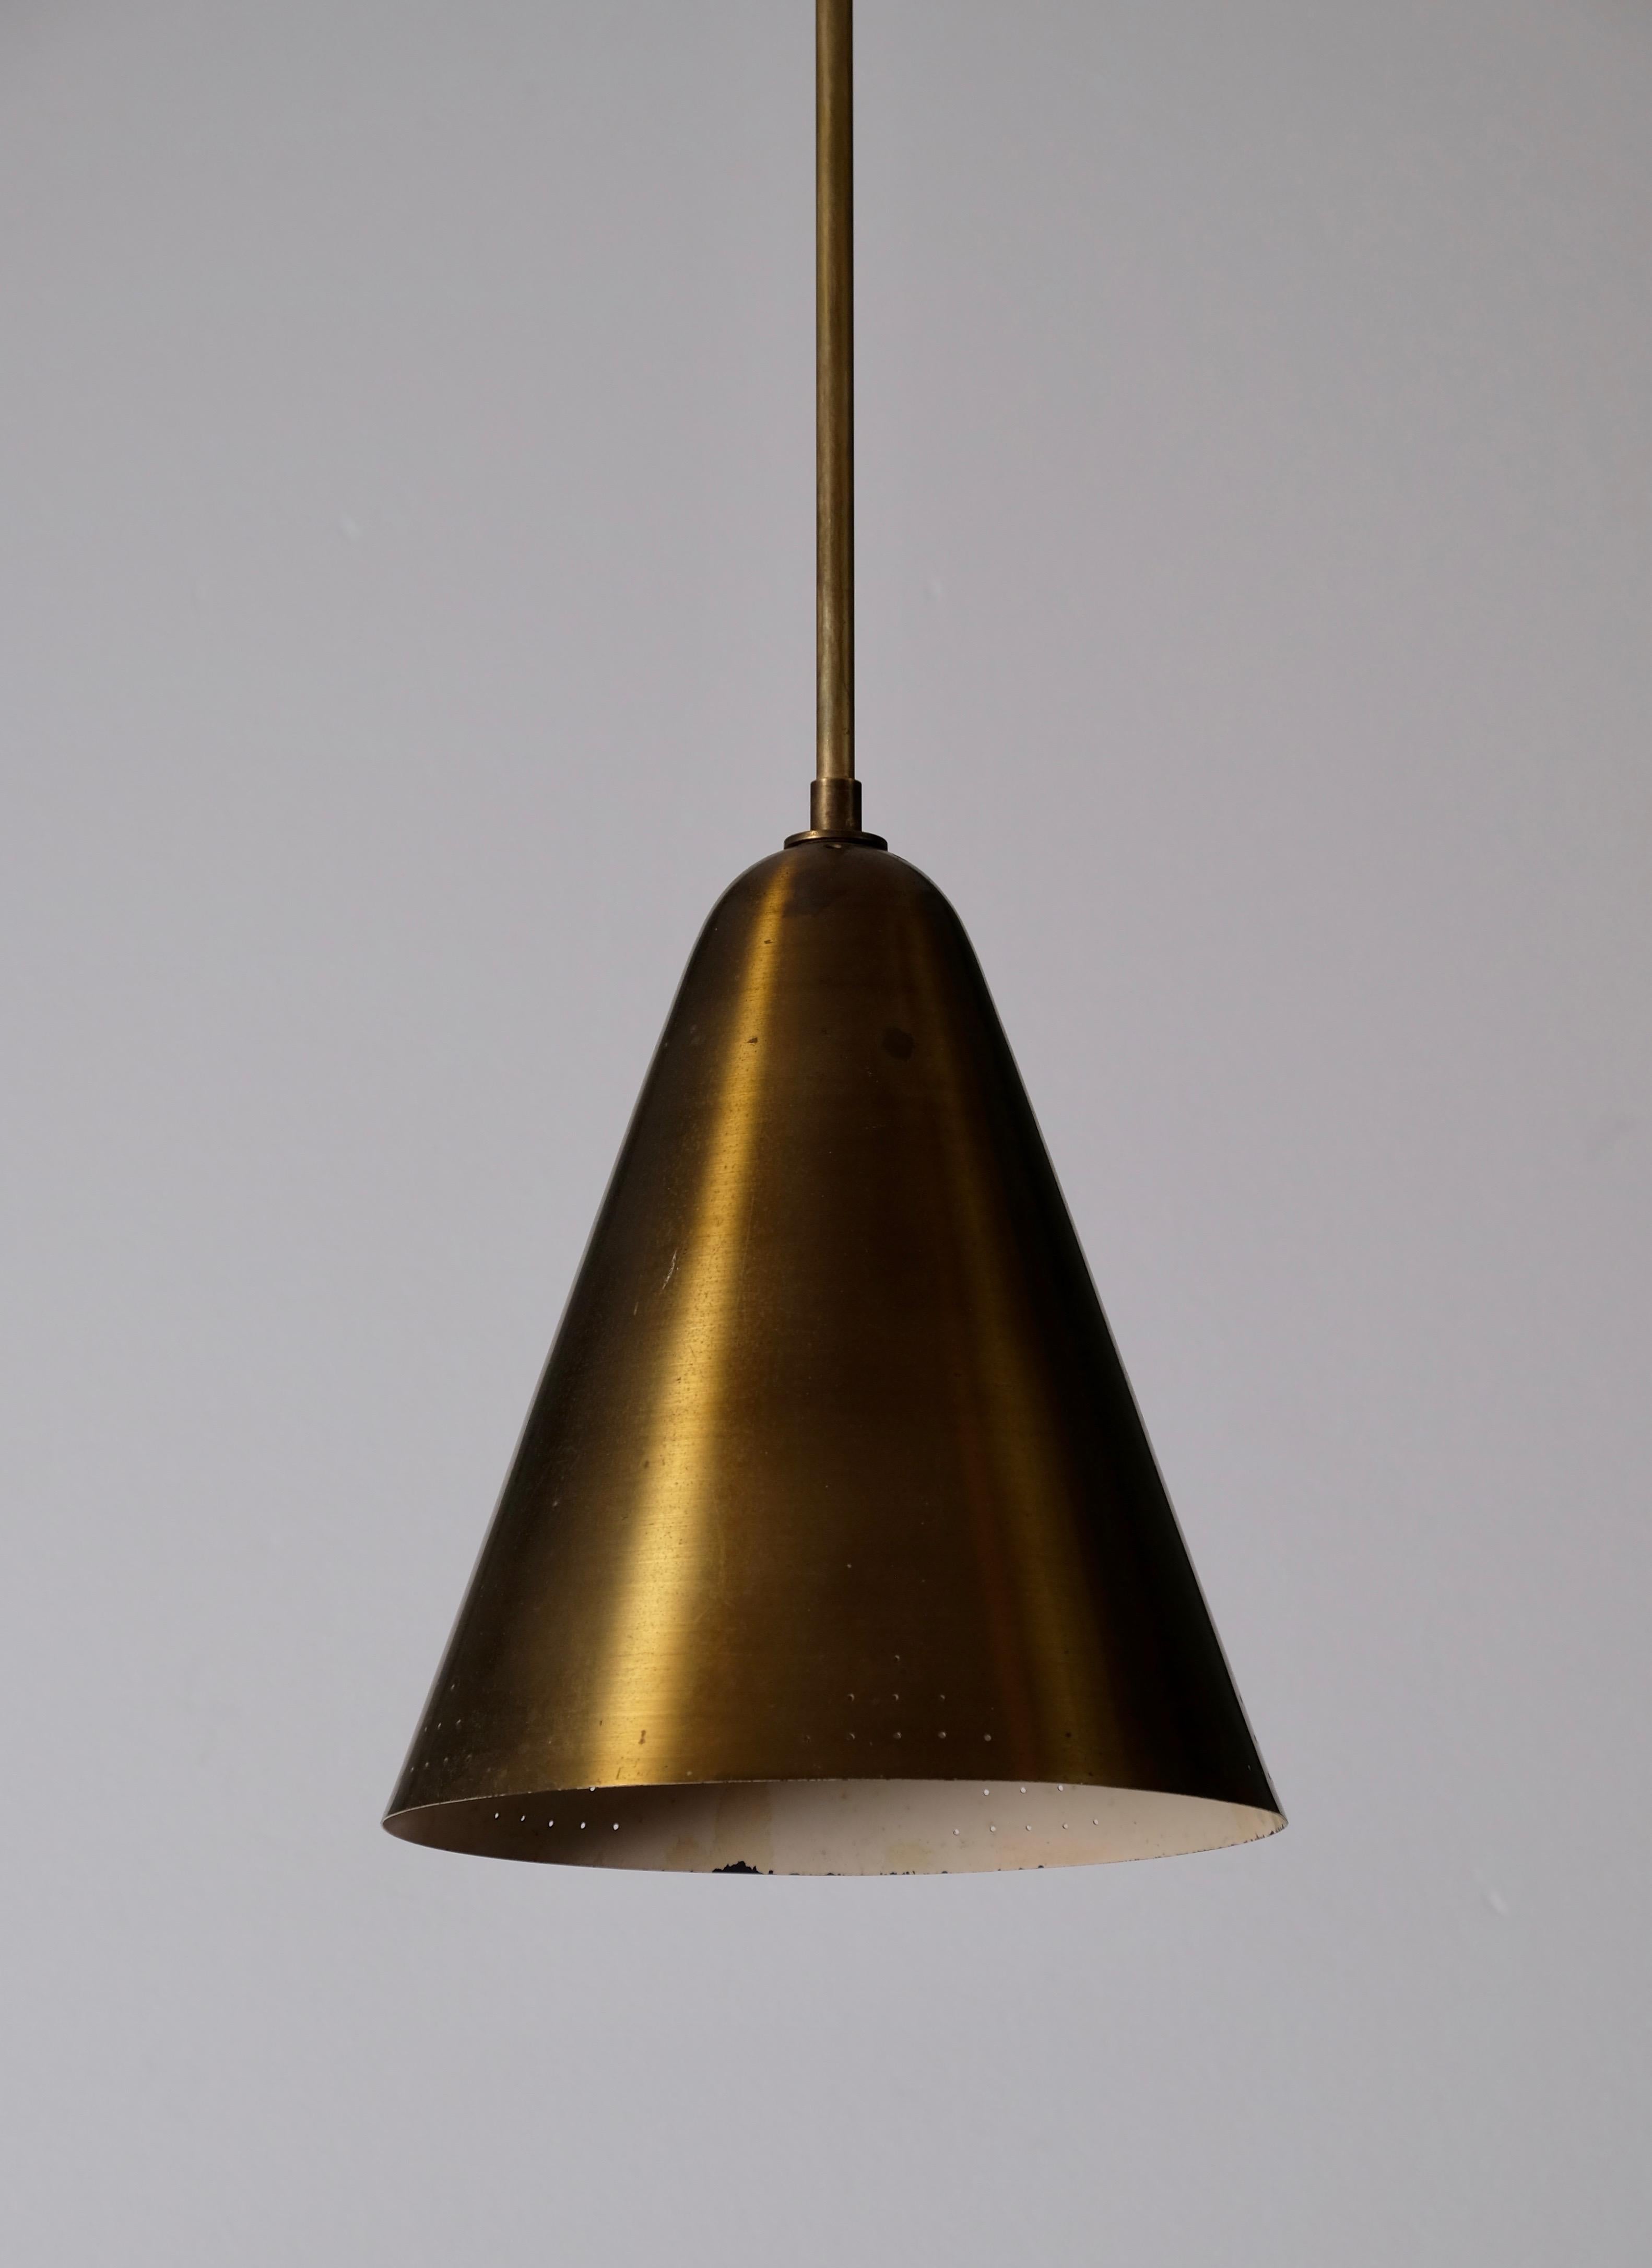 Rare model. Produced by Ateljé Lyktan, Åhus, Sweden, 1950s.
Rewired. Height is adjustable. Perforated brass.